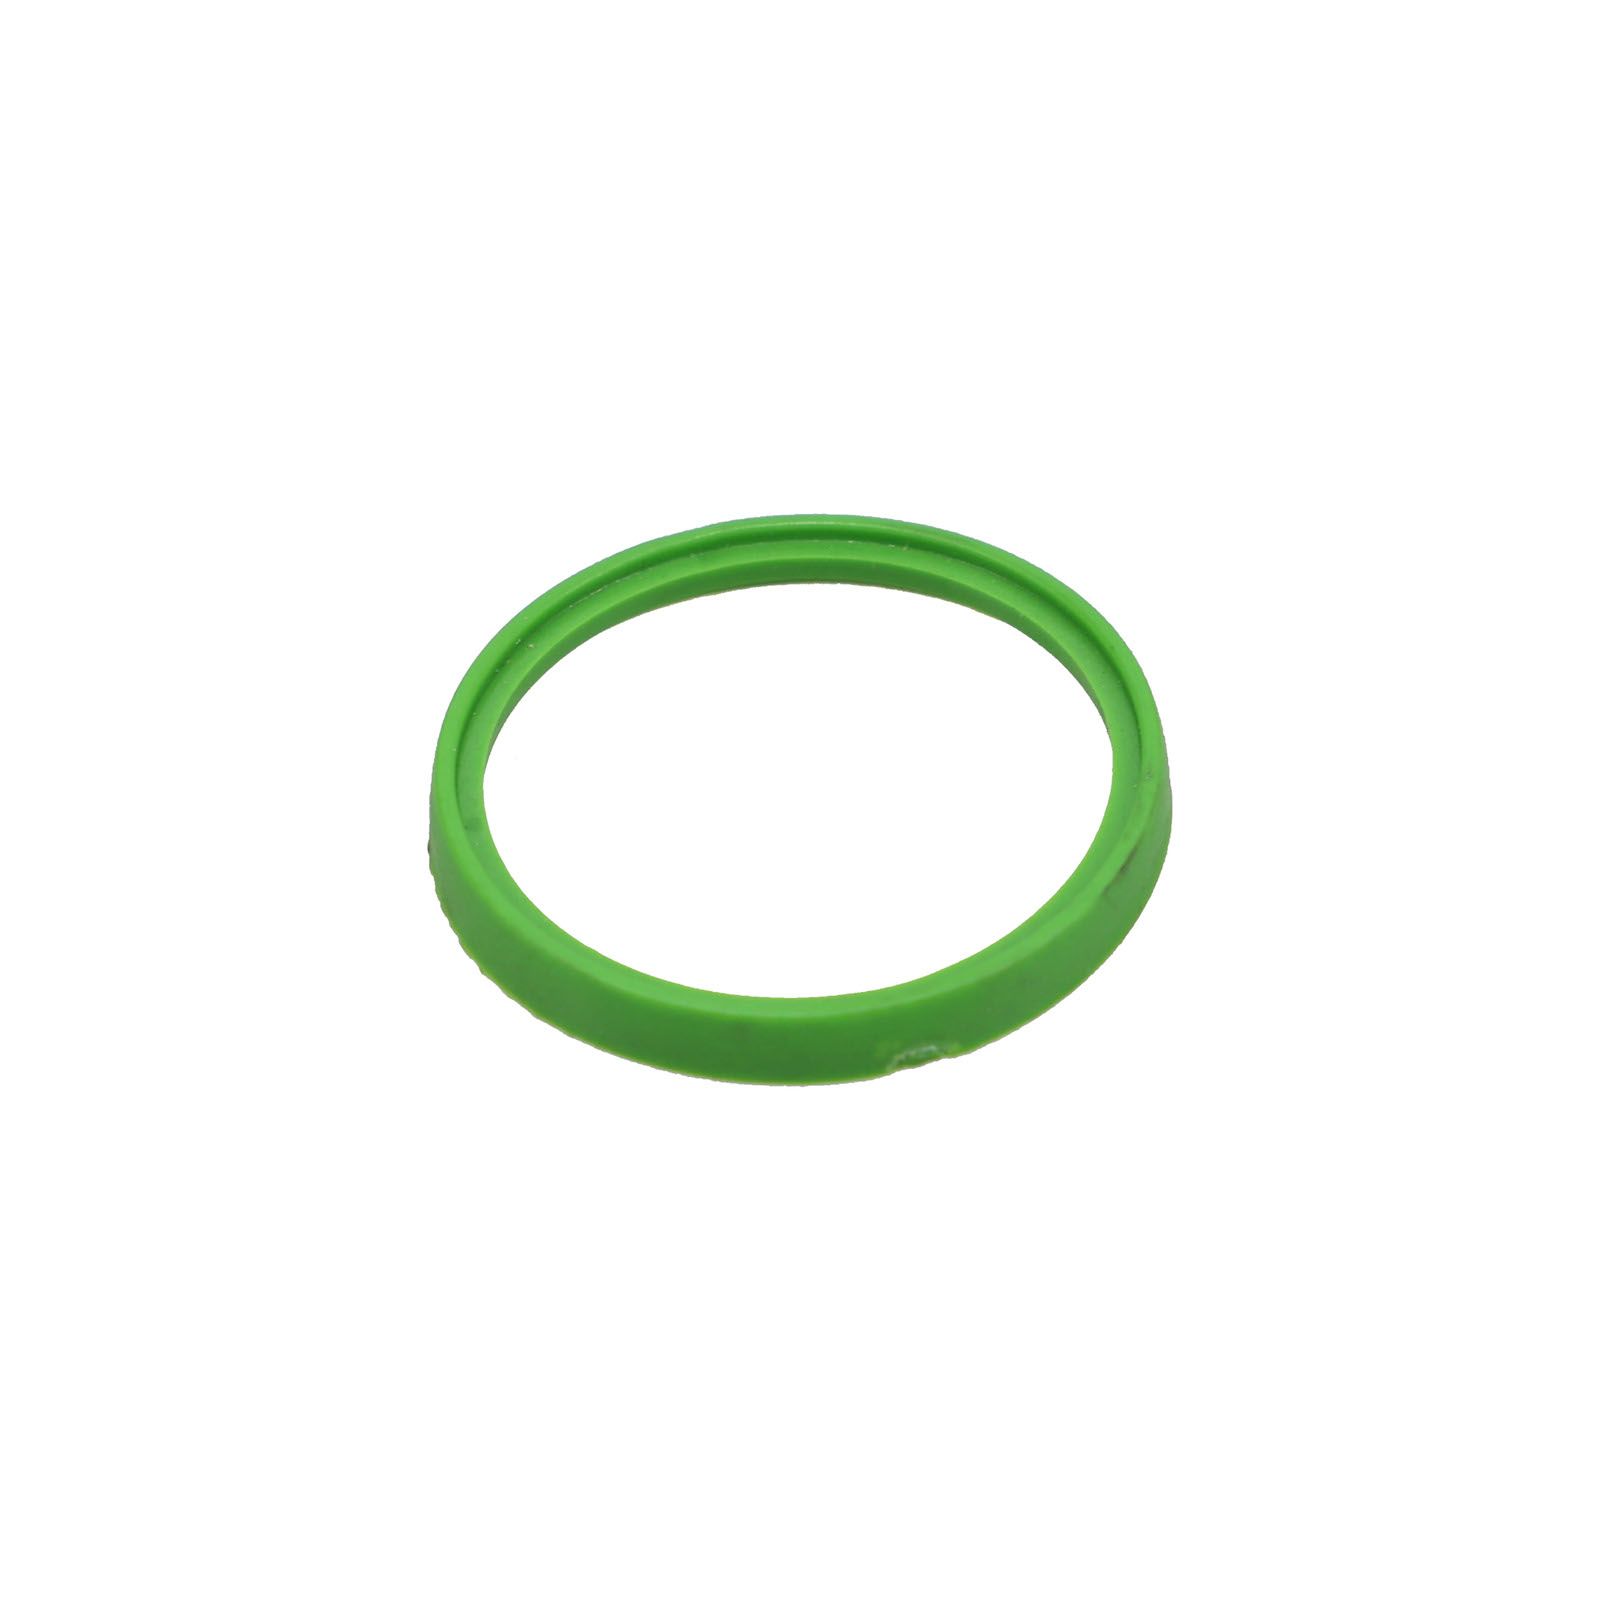 COLOR RING GREEN productfoto